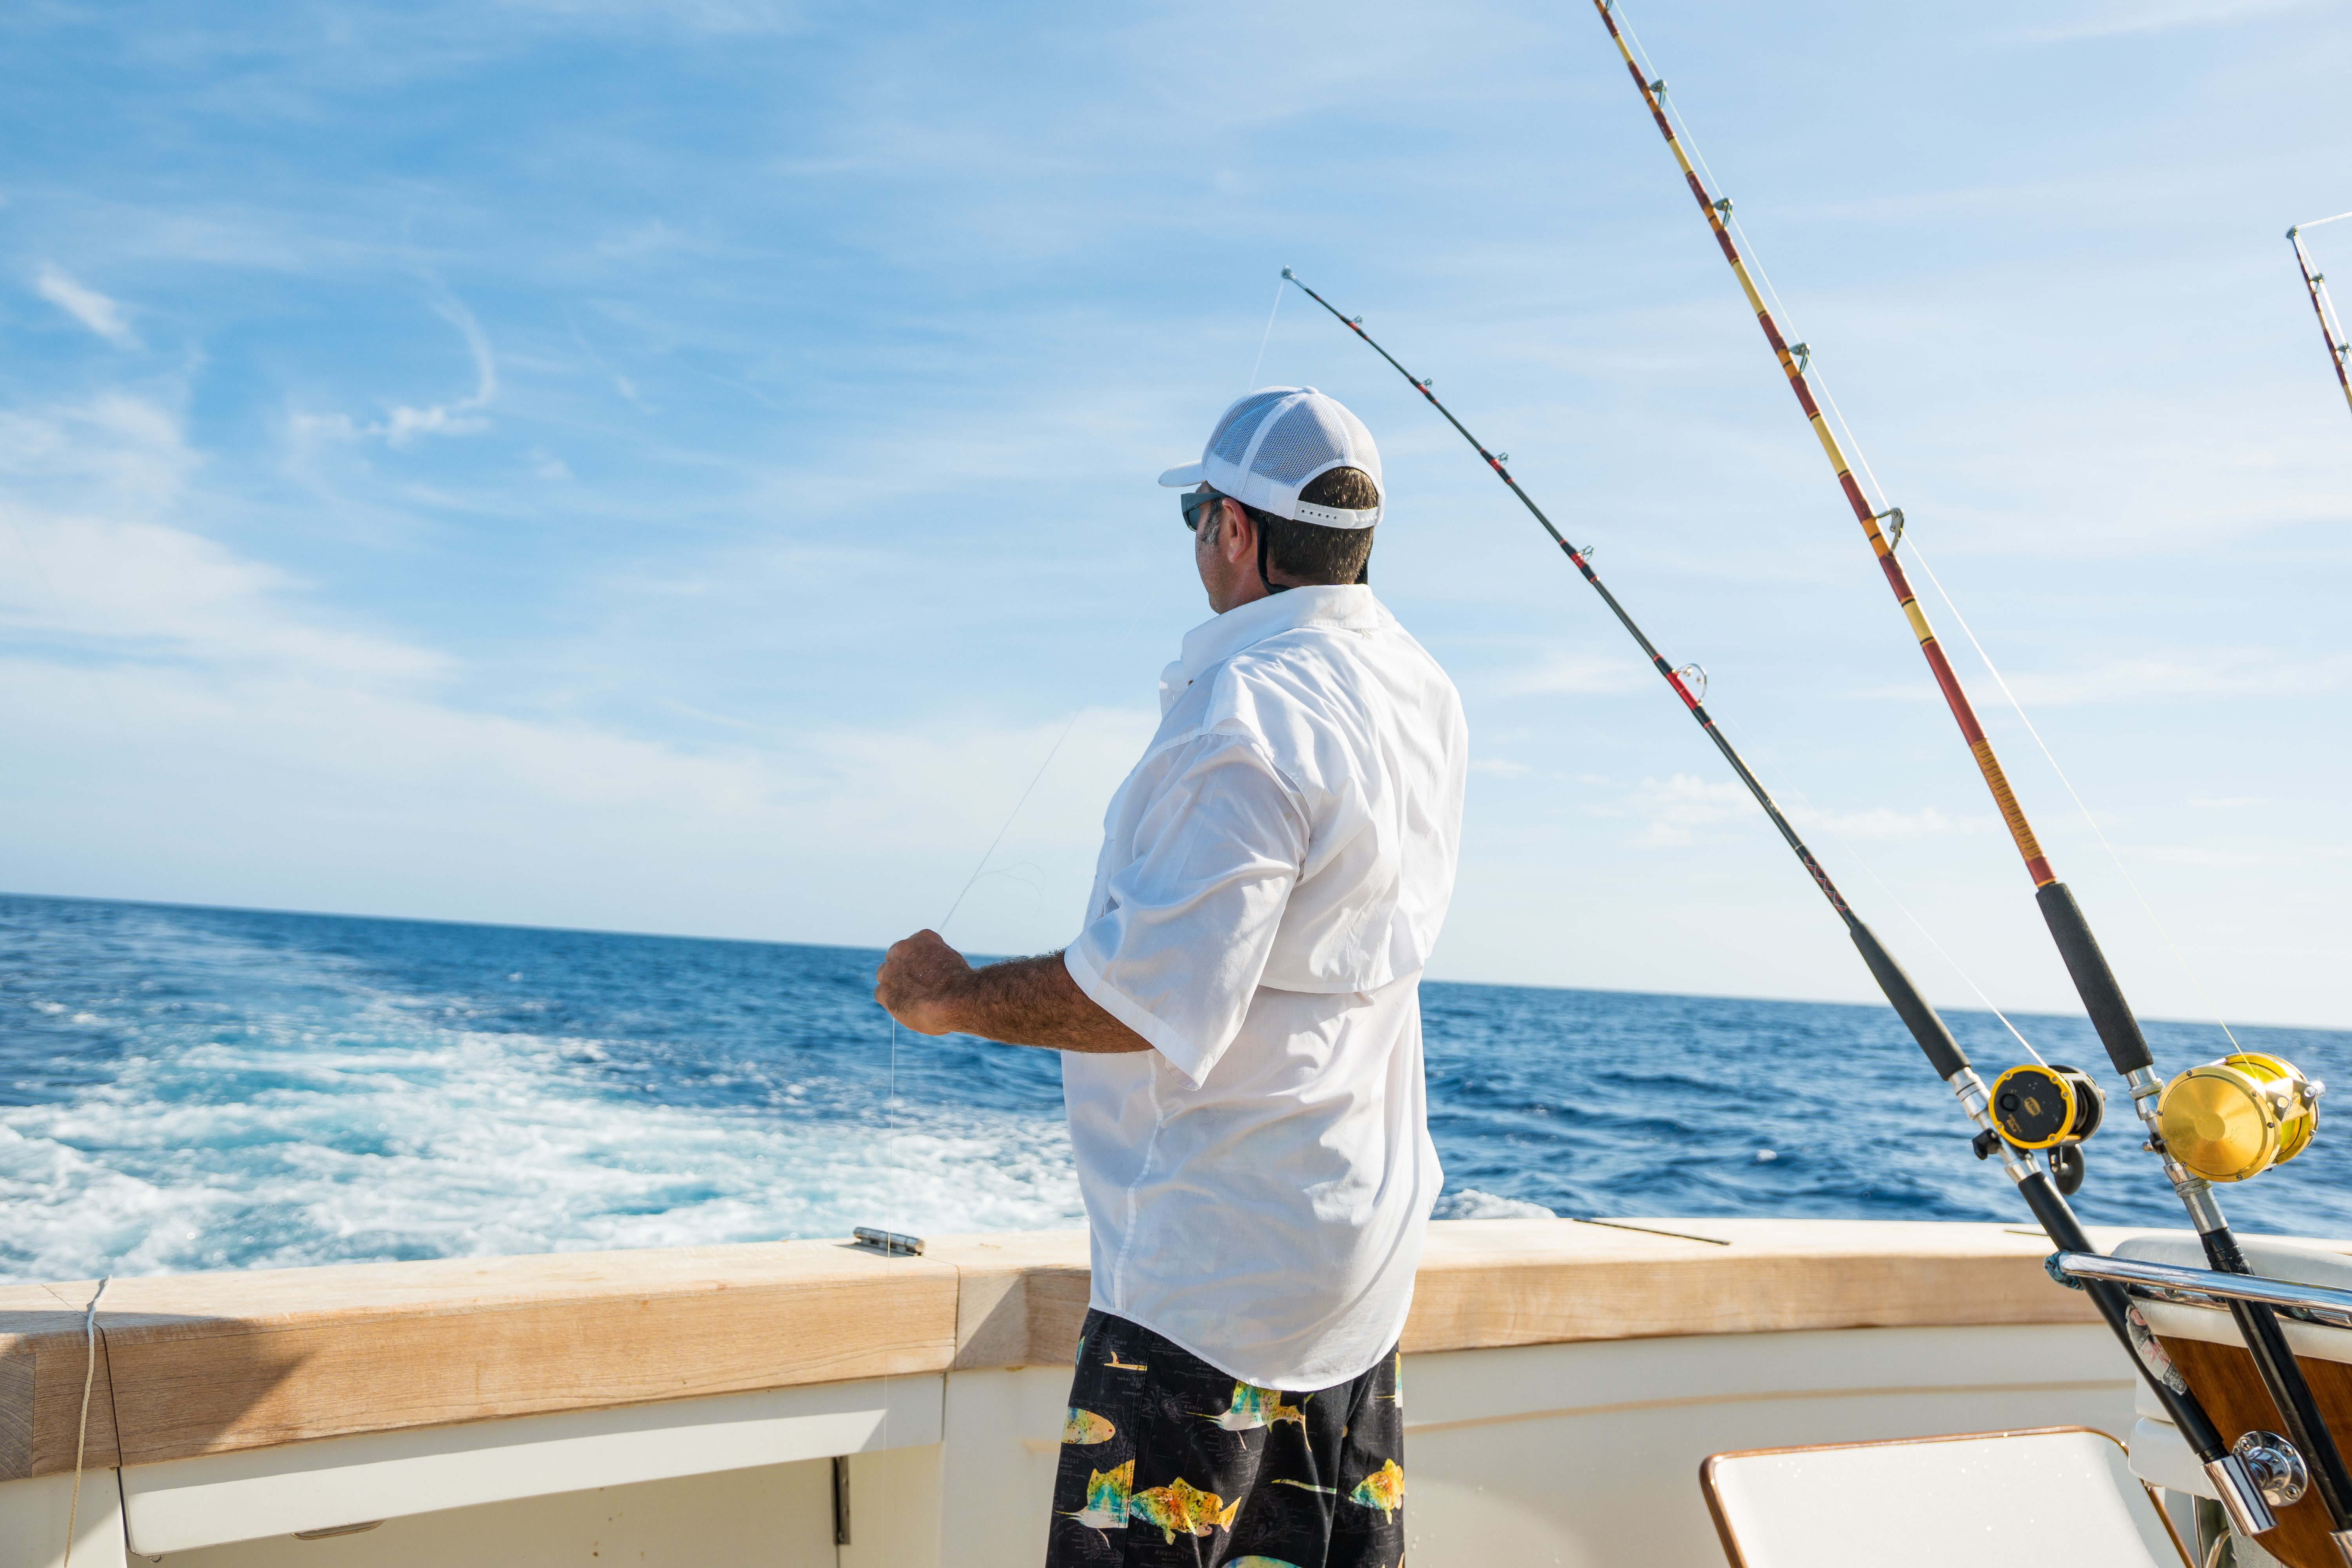 Deep sea fishing adventures for anglers and fishermen in the Caribbean